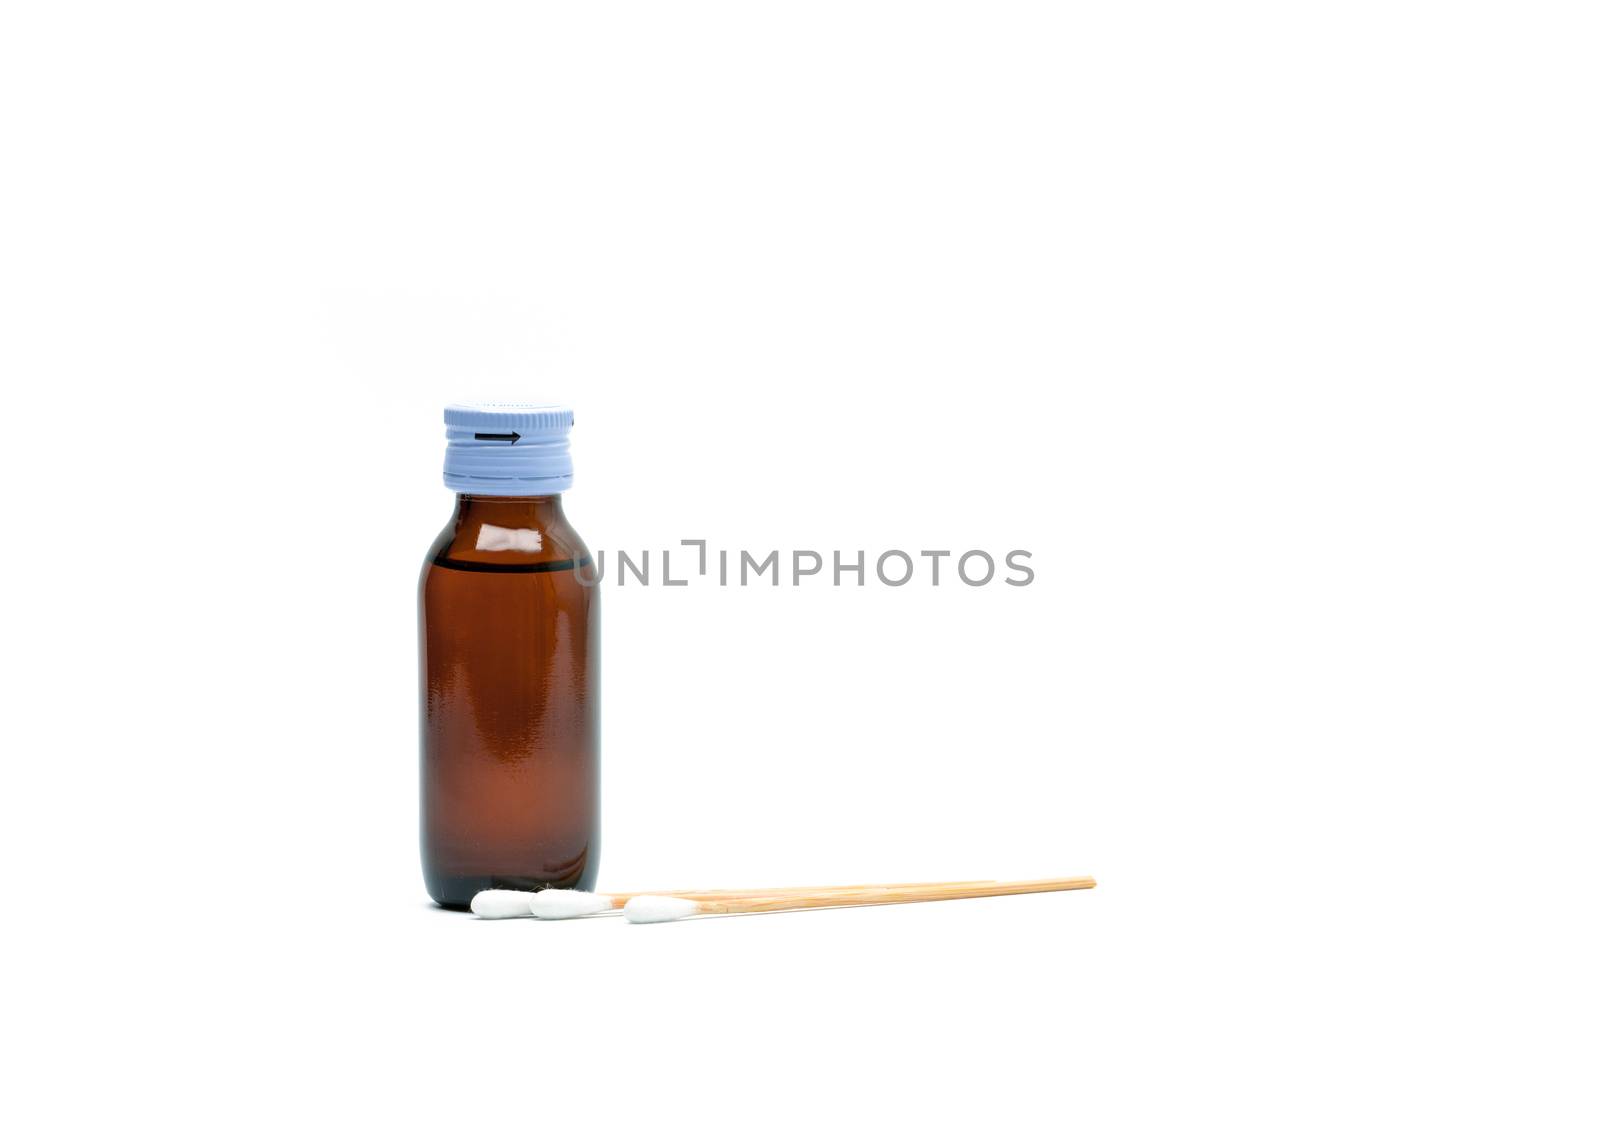 Cotton sticks and antiseptic solutions in amber glass bottle isolated on white background. Concept of Umbilical cord care for helps prevent infection. Infant's umbilical cord cleaning care equipment. by Fahroni